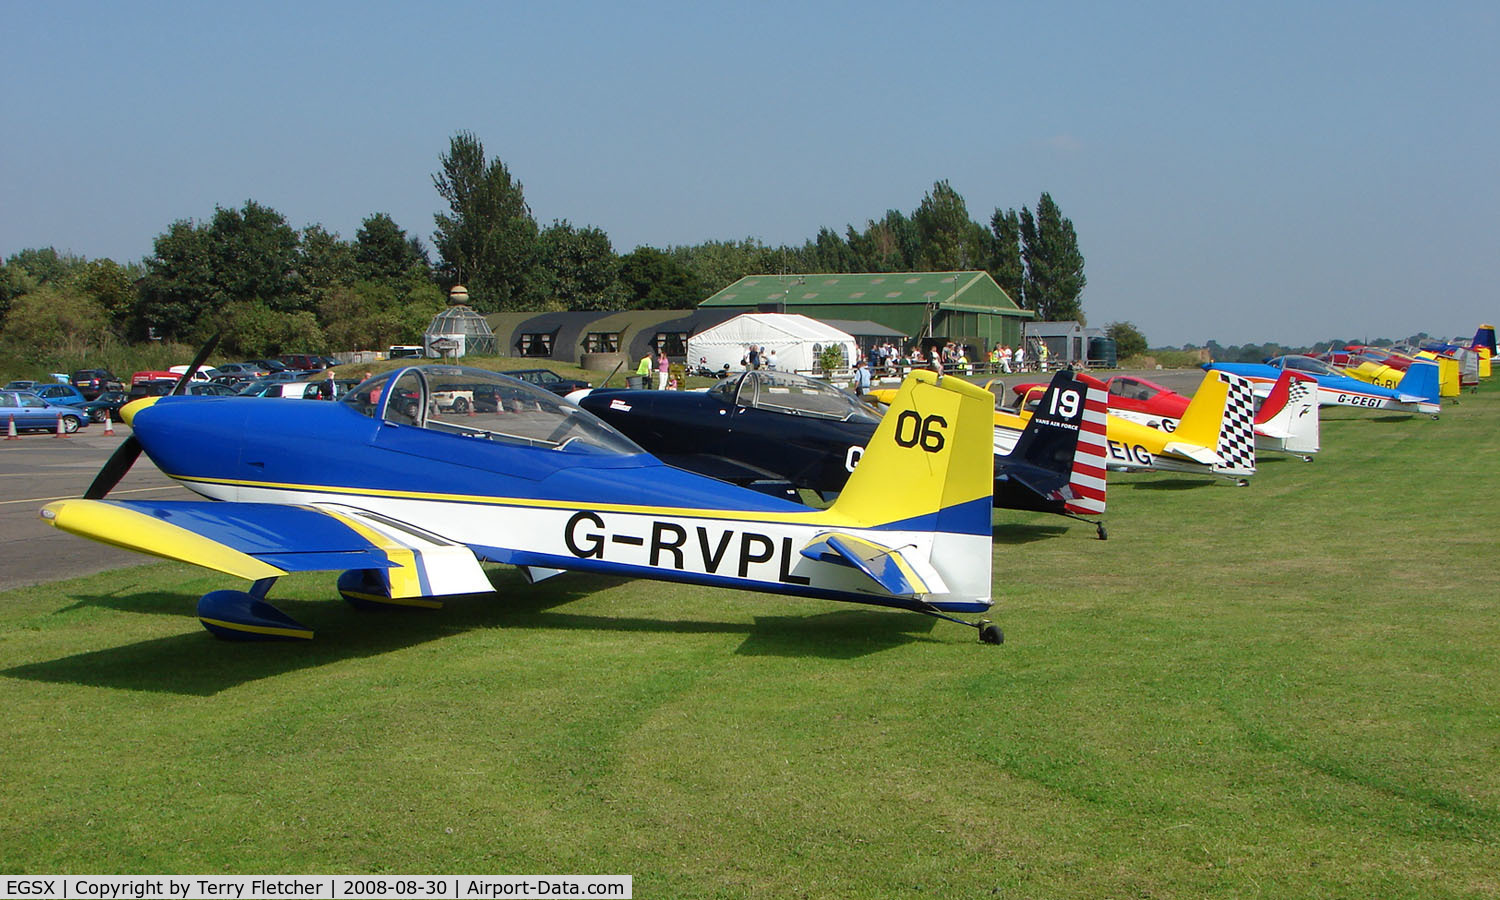 North Weald Airfield Airport, North Weald, England United Kingdom (EGSX) - Participants in the 2008 RV Fly-in at North Weald Uk